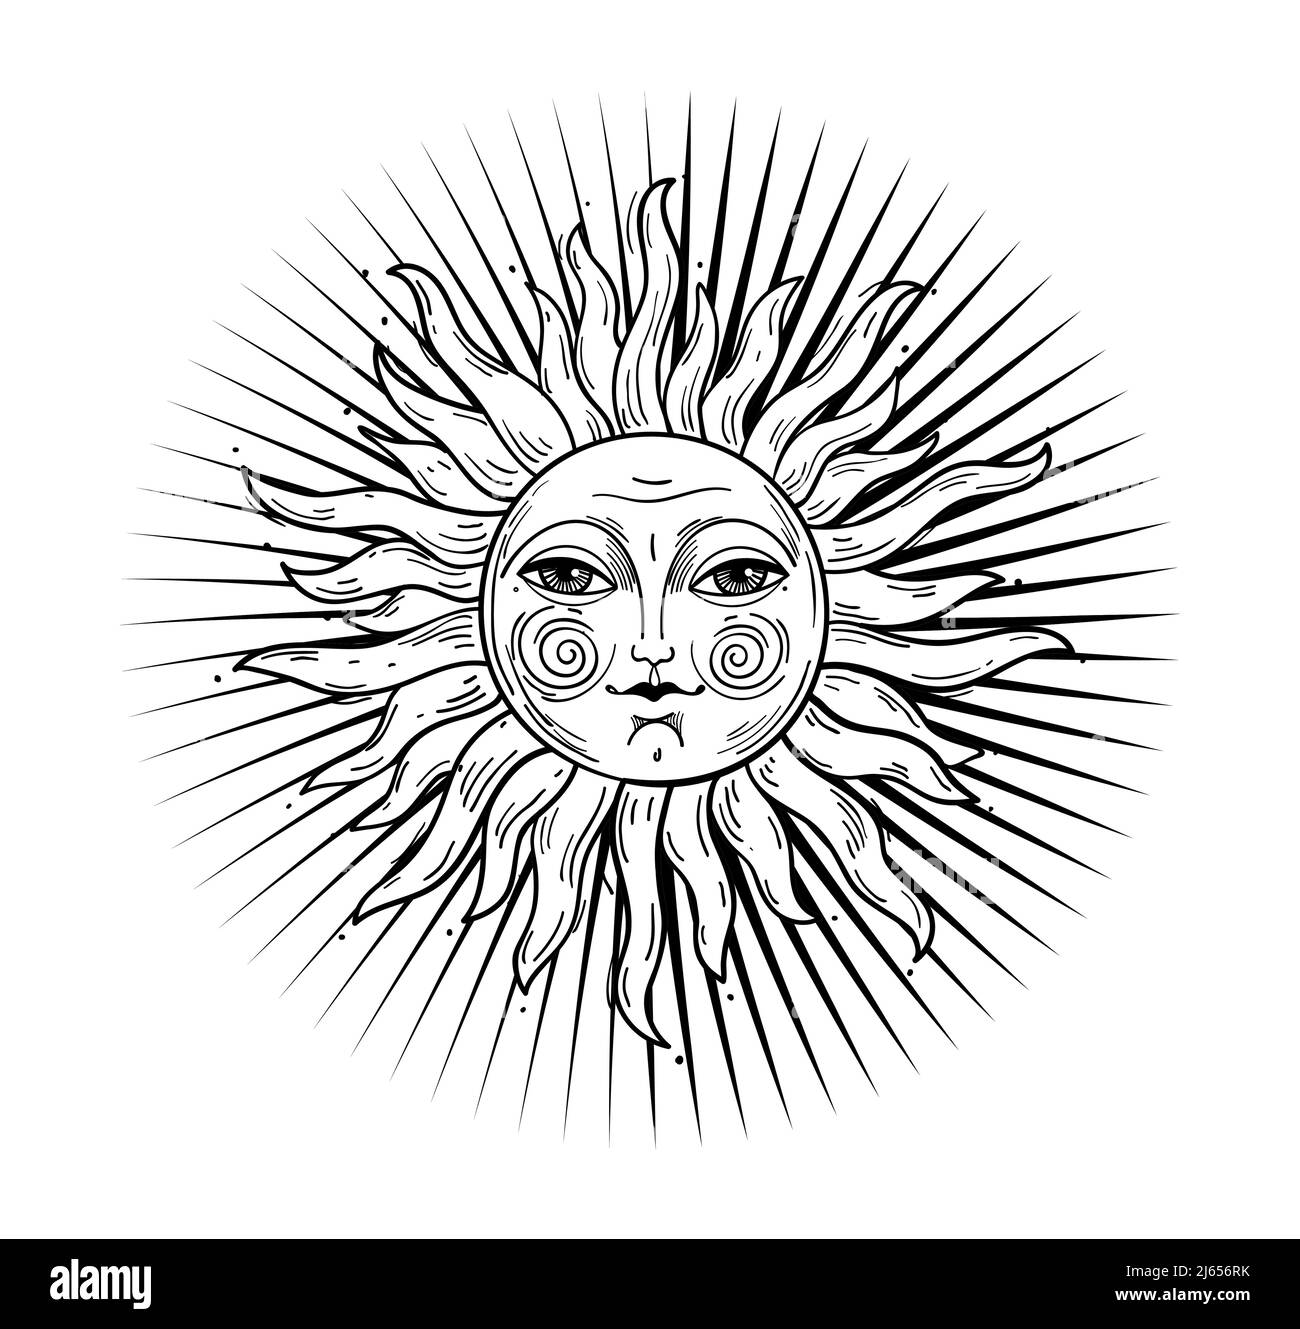 Heaven illustration, stylized vintage design, sun with face, stylized drawing, engraving. Mystical design element in boho style, logo, tattoo. Vector Stock Vector